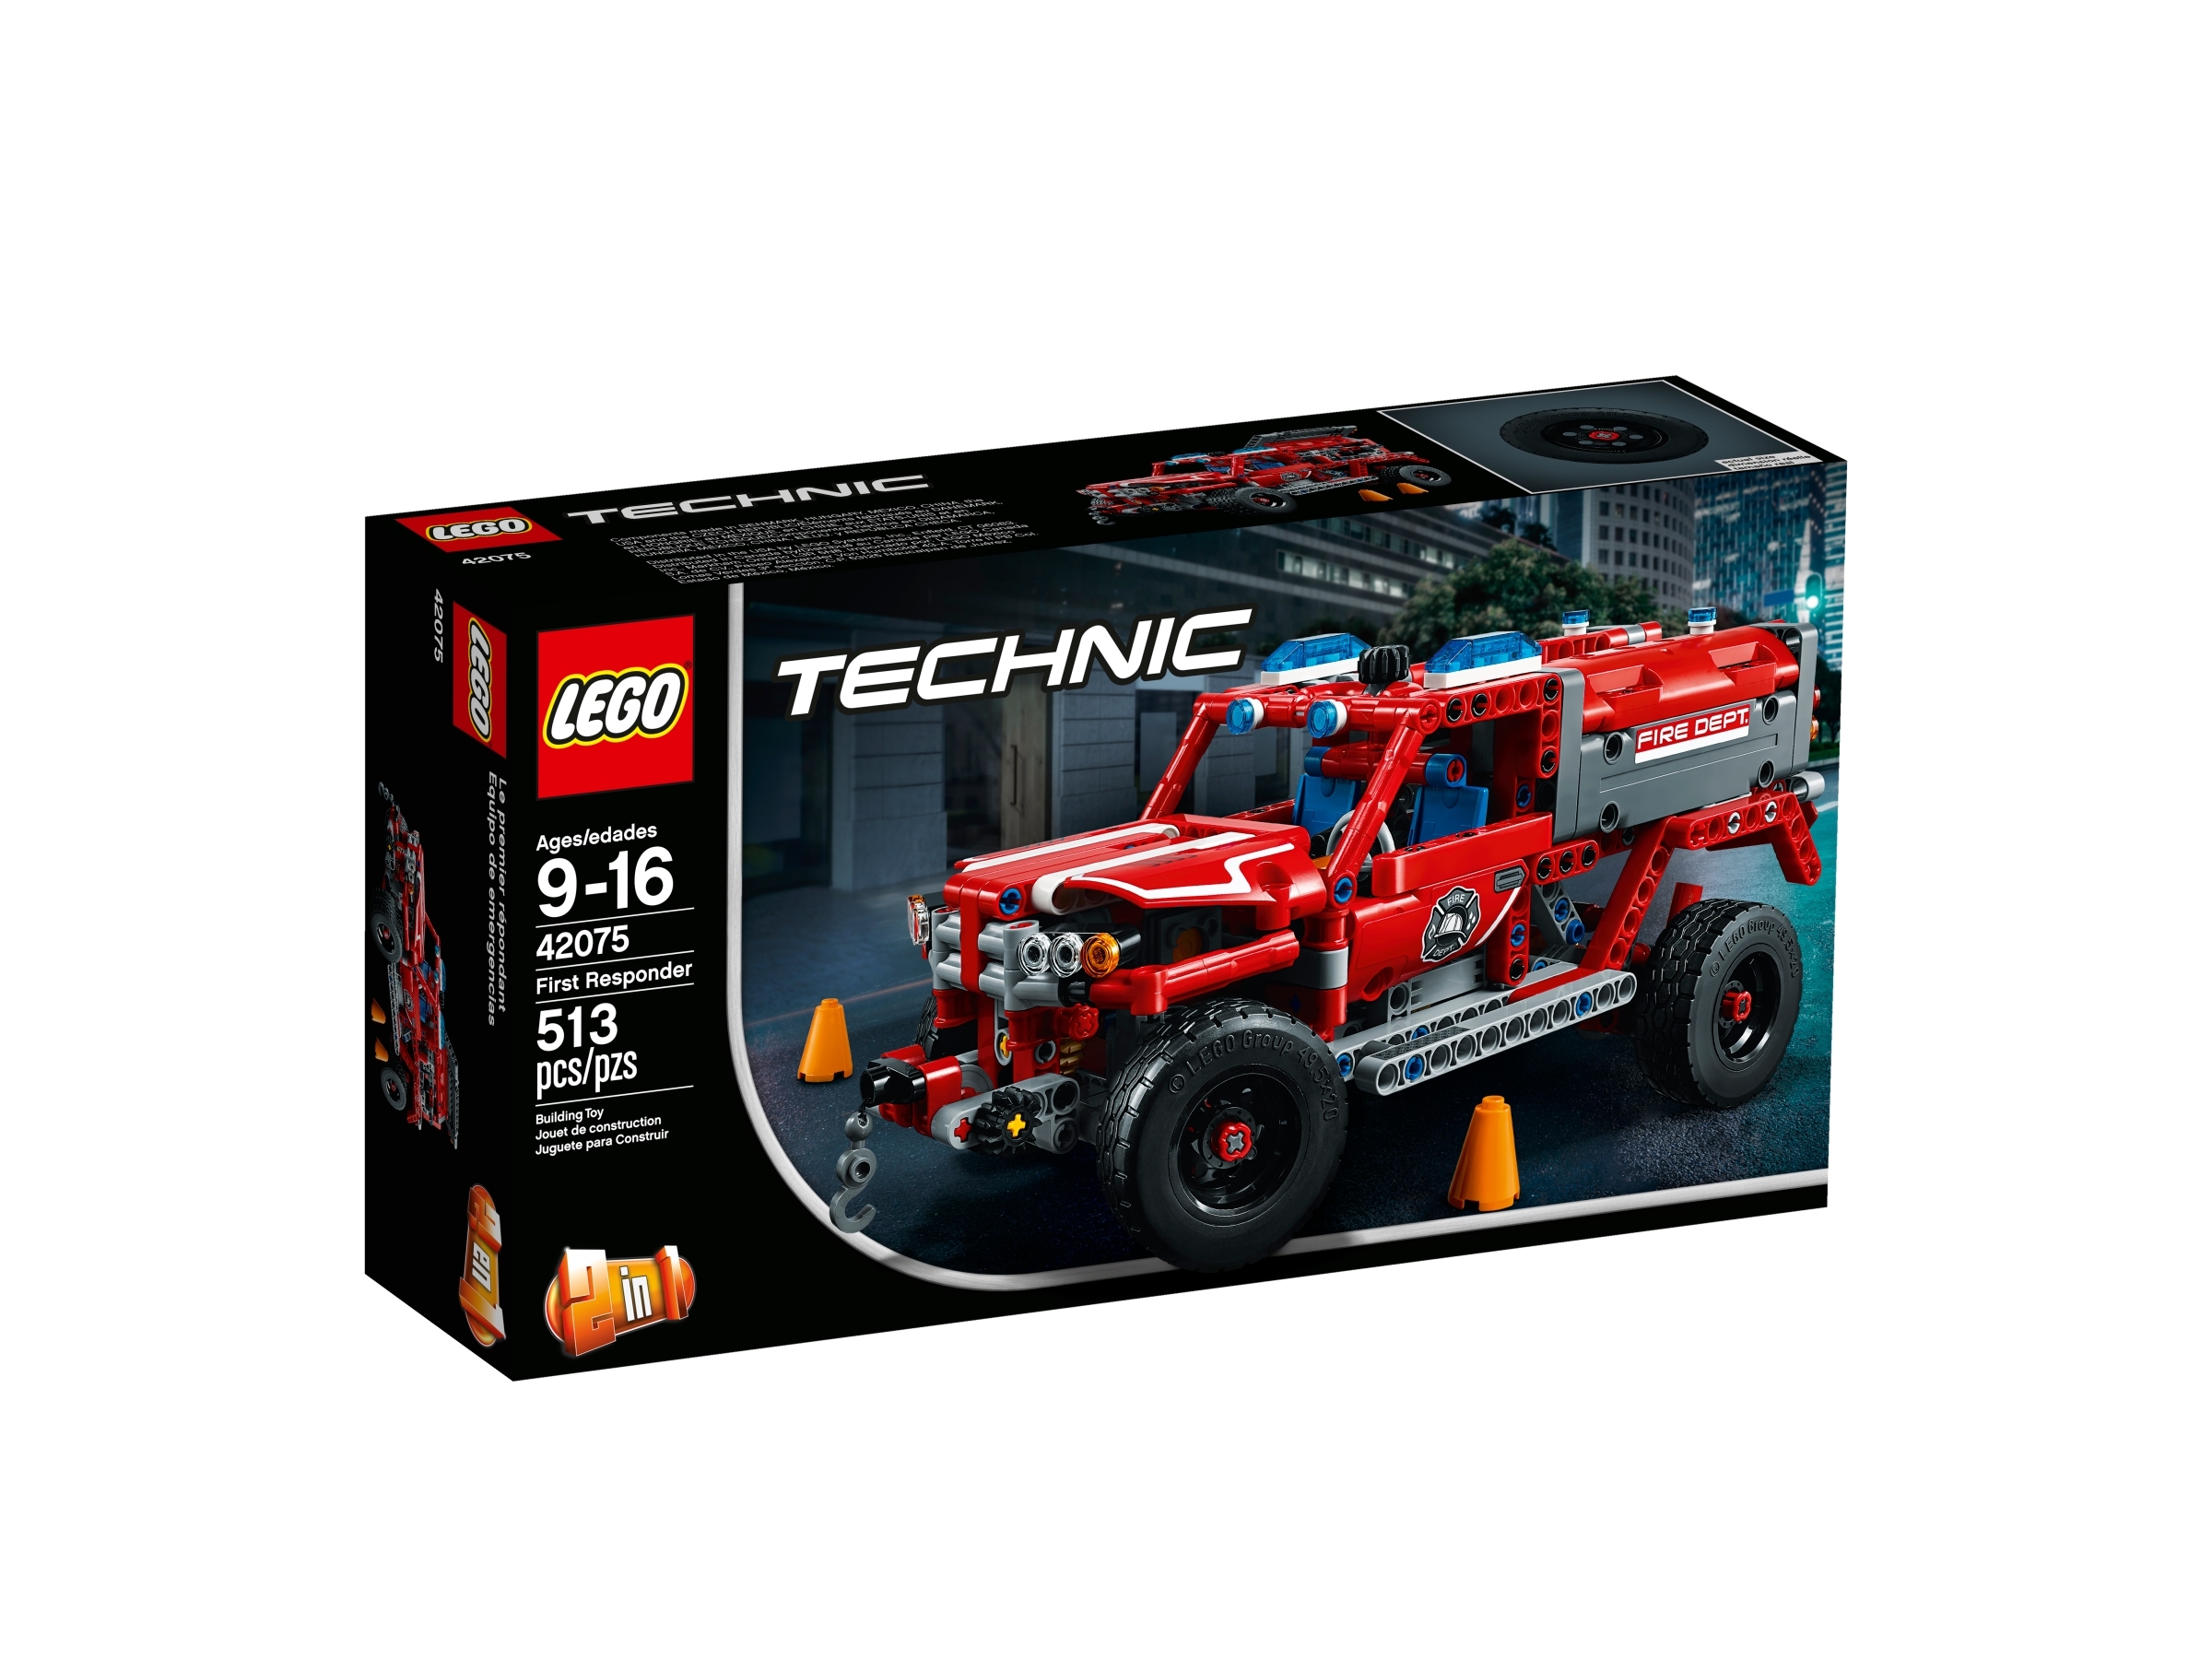 Responder 42075 Technic™ | Buy online at the Shop US